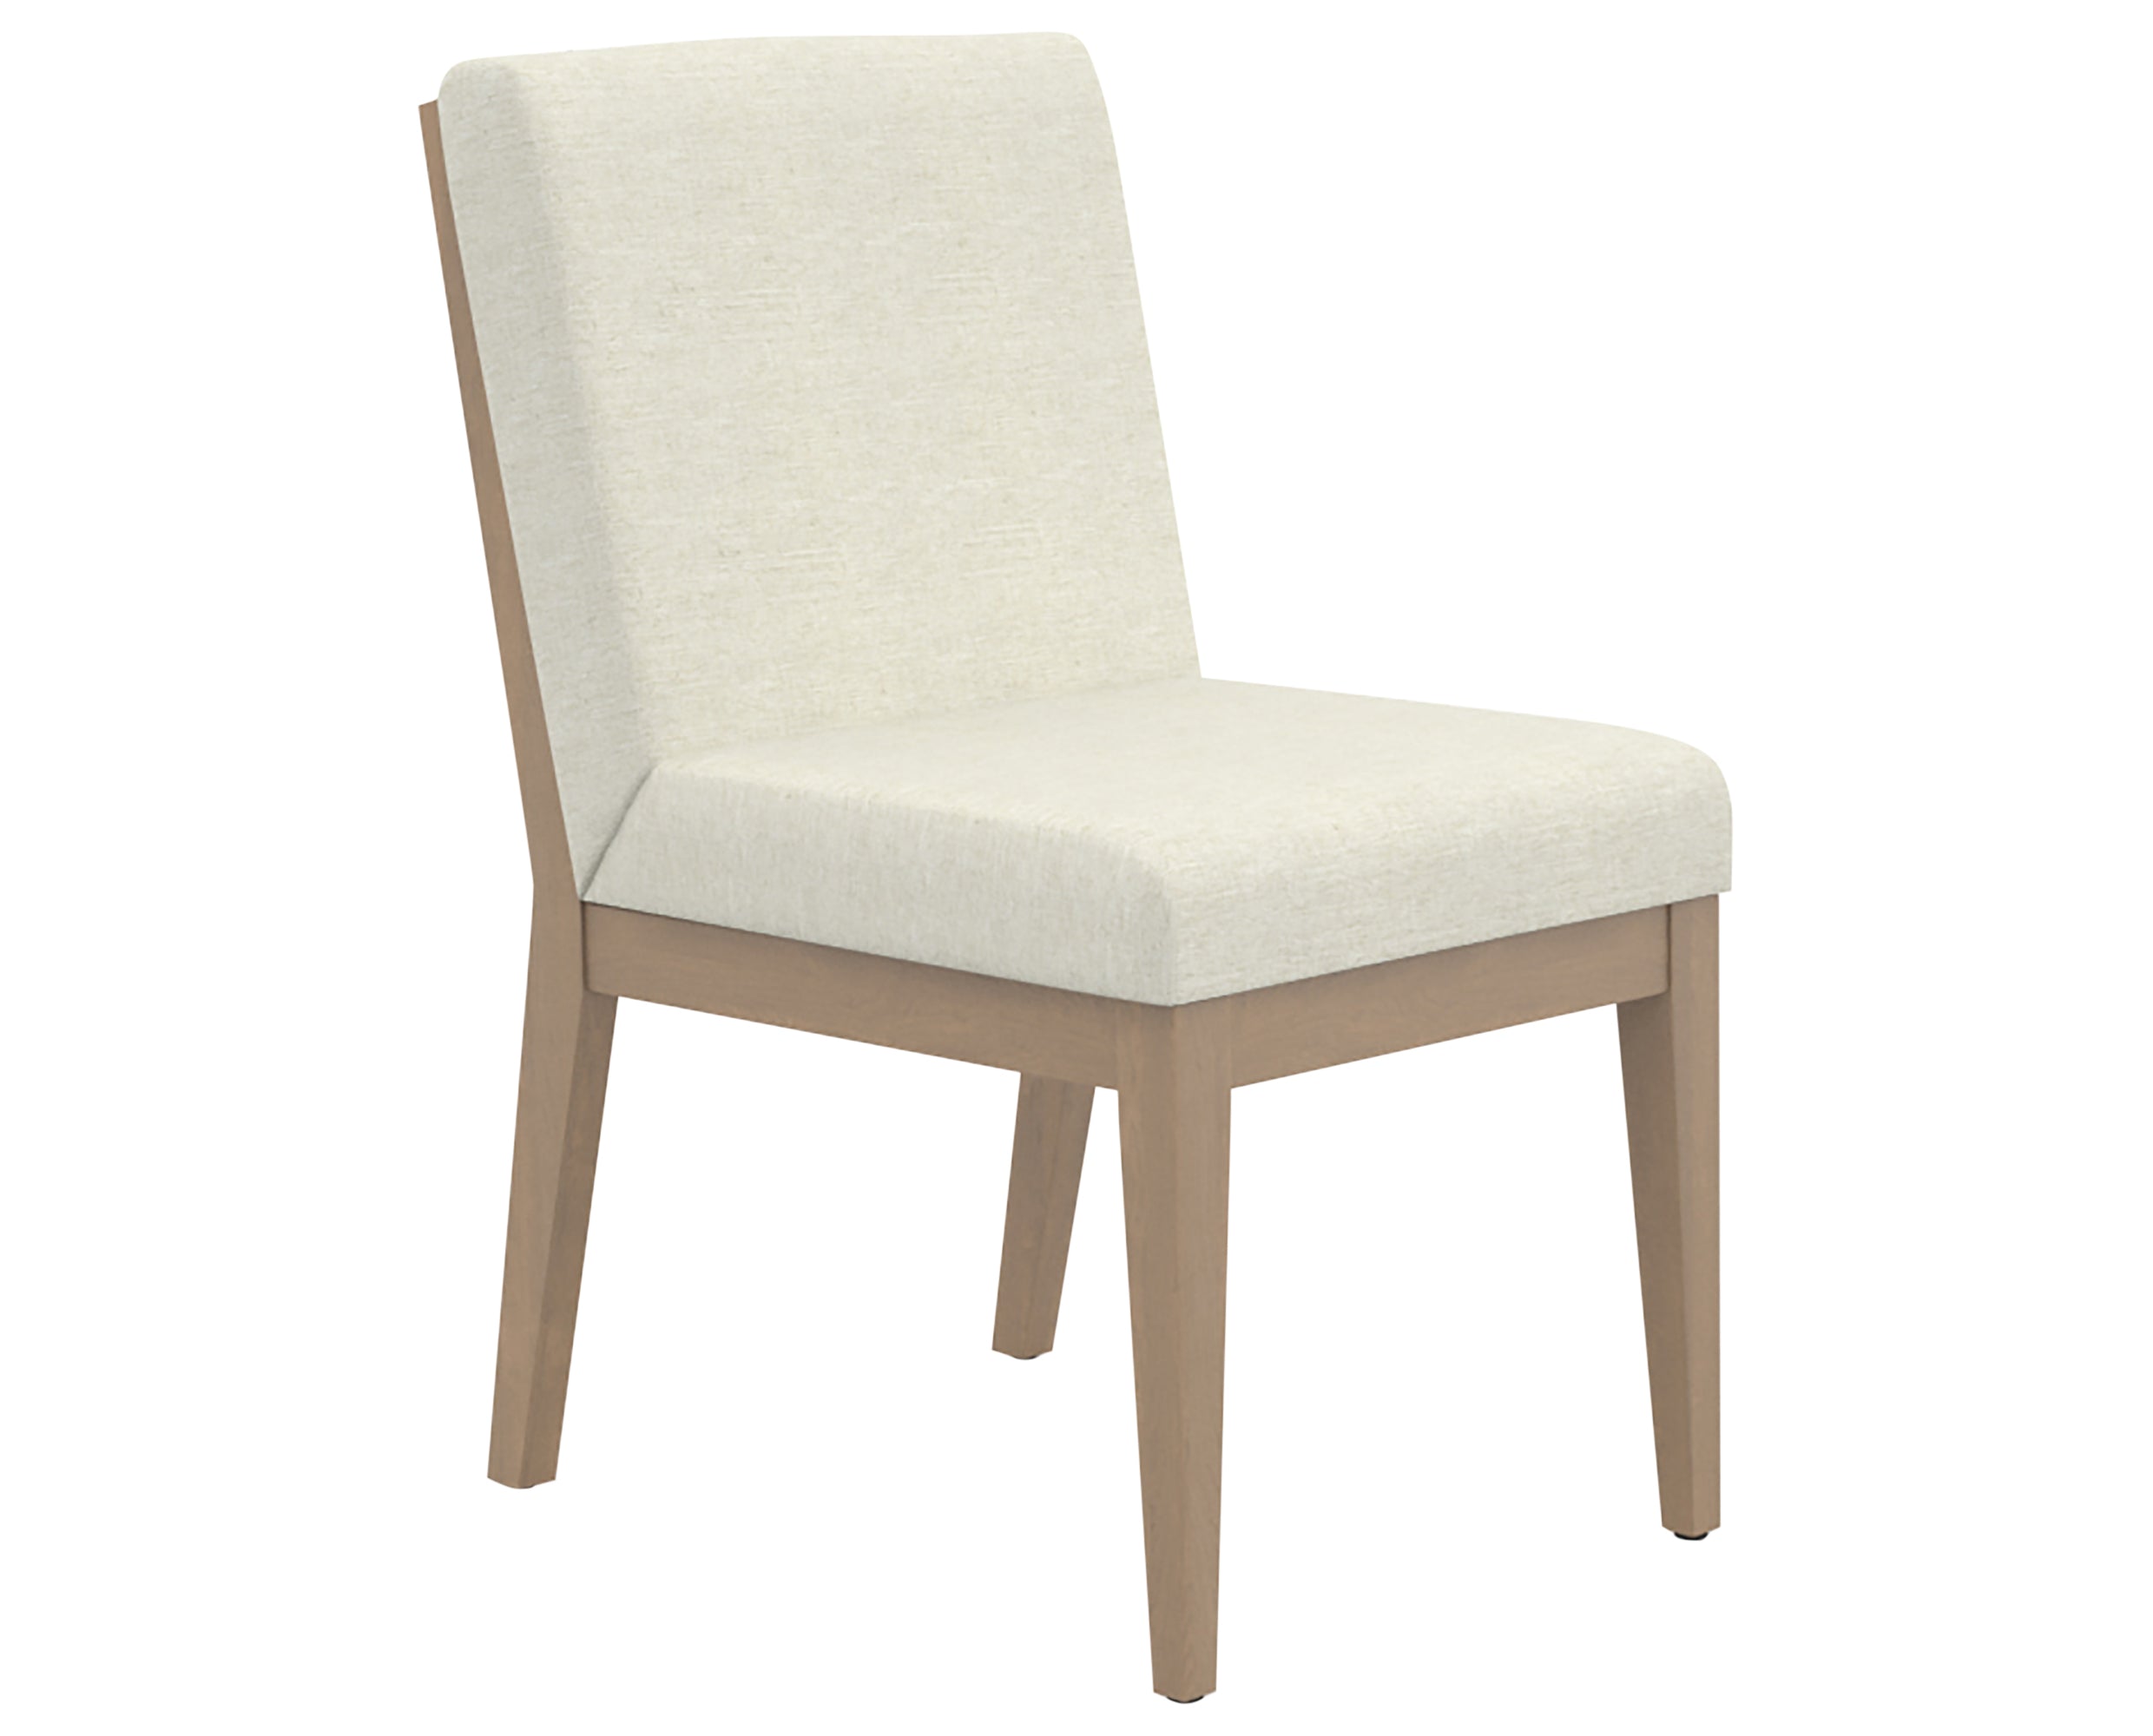 Pecan Washed &amp; Fabric TW | Canadel Modern Dining Chair 5179 | Valley Ridge Furniture